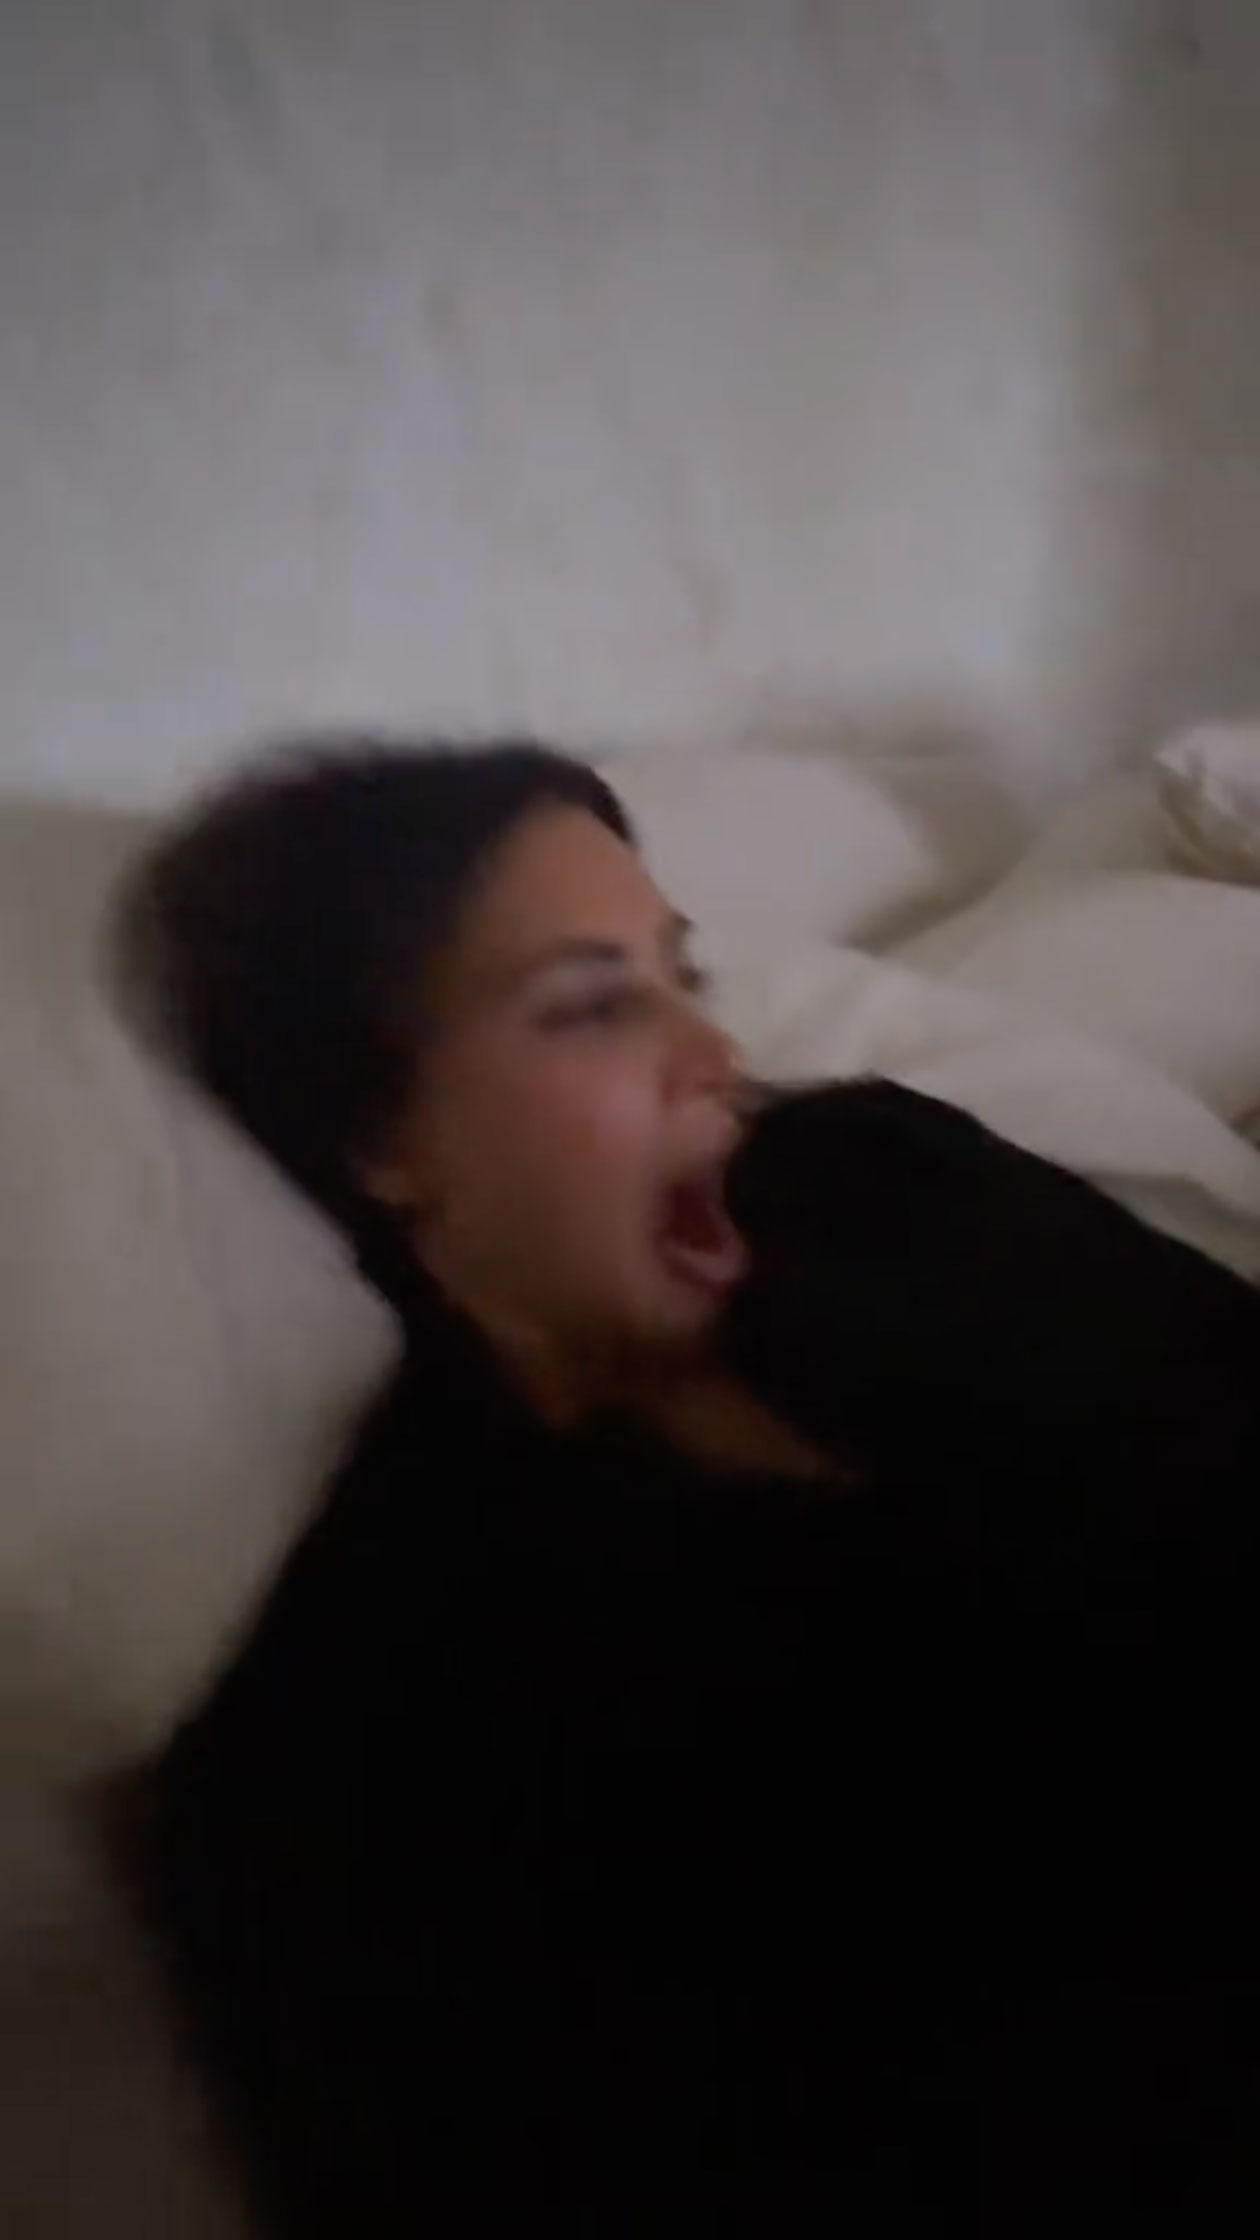 This time Kim was caught while yawning in bed